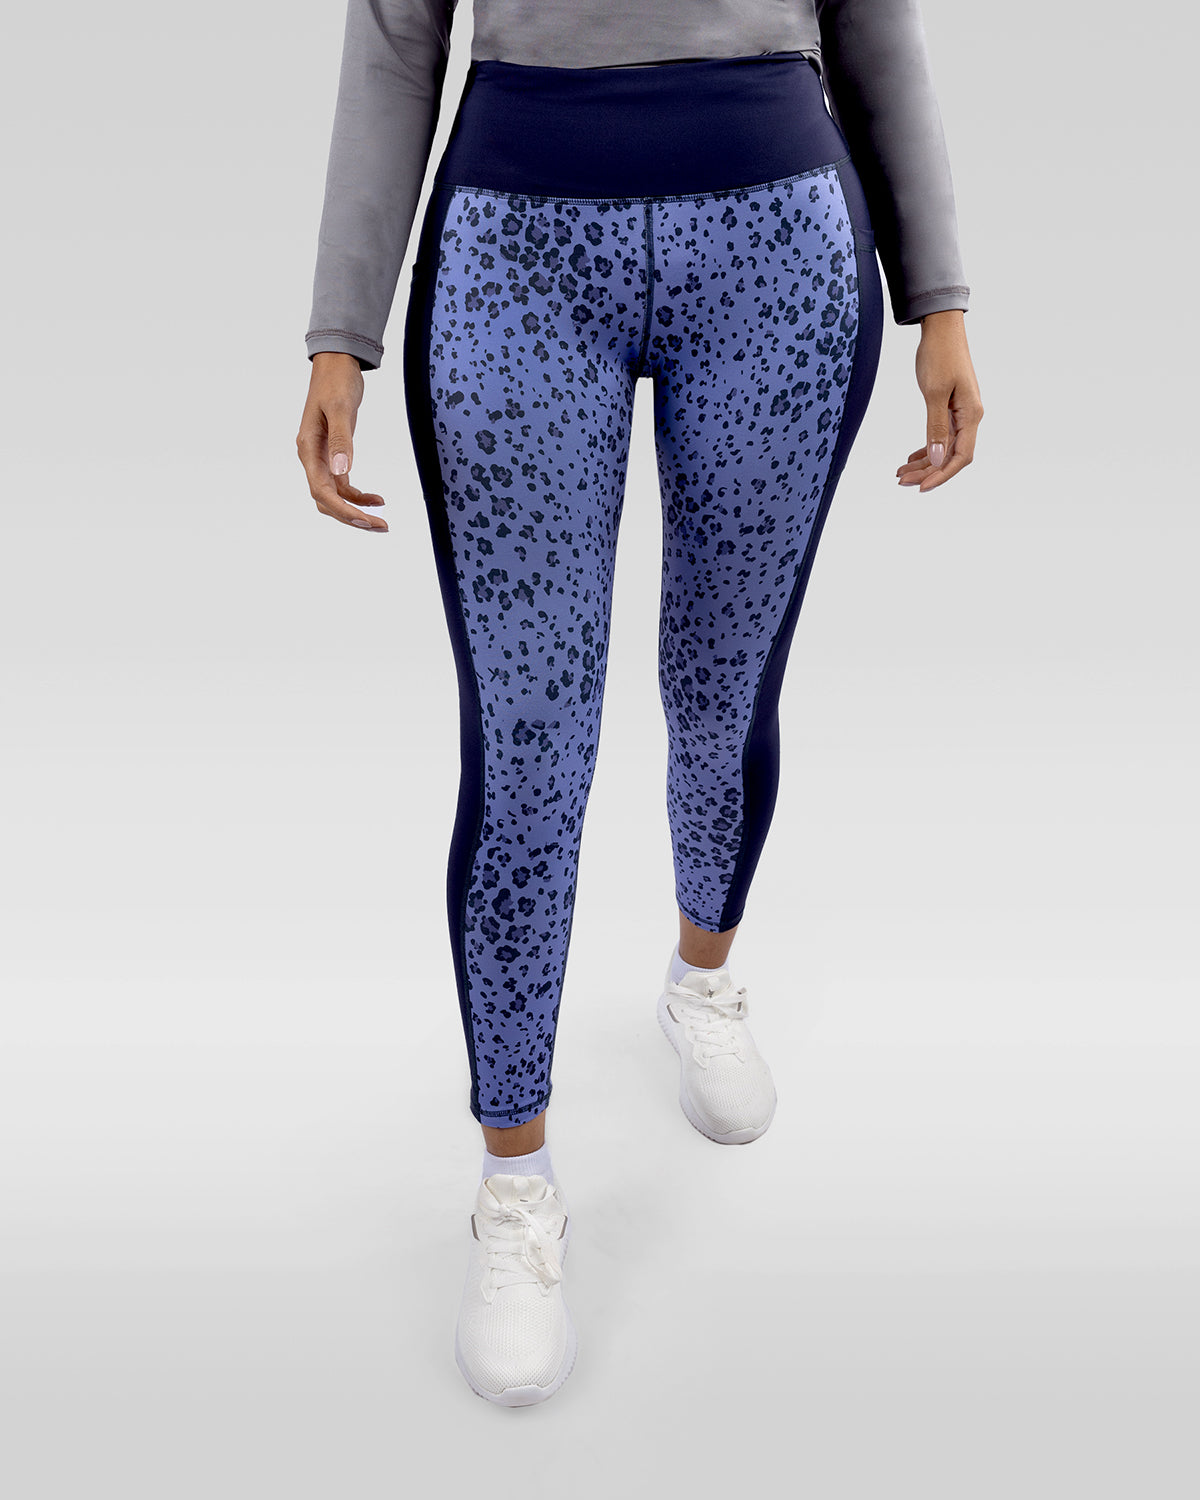 Photo by 𝗔𝗧𝗨𝗠 SPORTSWEAR ® on December 20, 2022. May be an image of 1 woman wears printed purple/navy floral leggings, and white shoes.